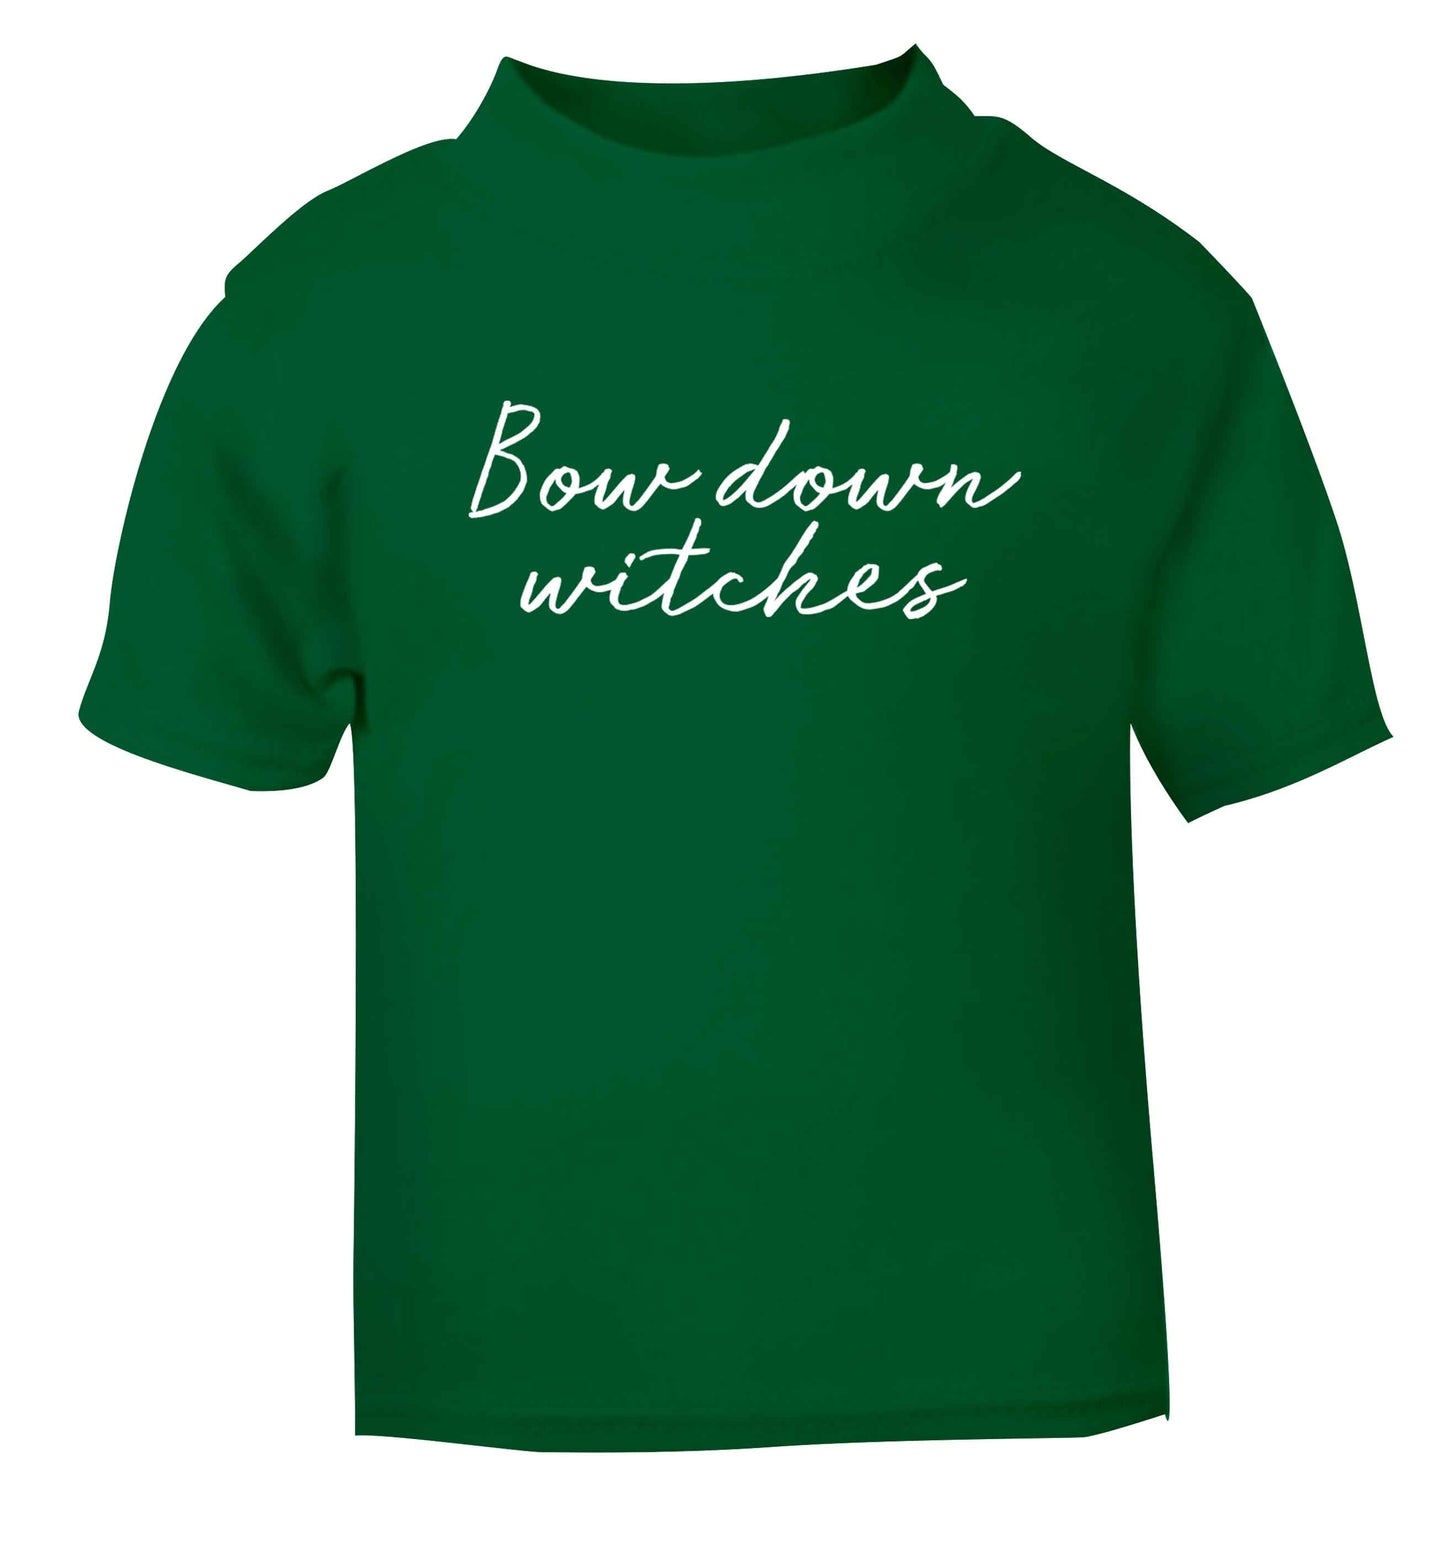 Bow down witches green baby toddler Tshirt 2 Years